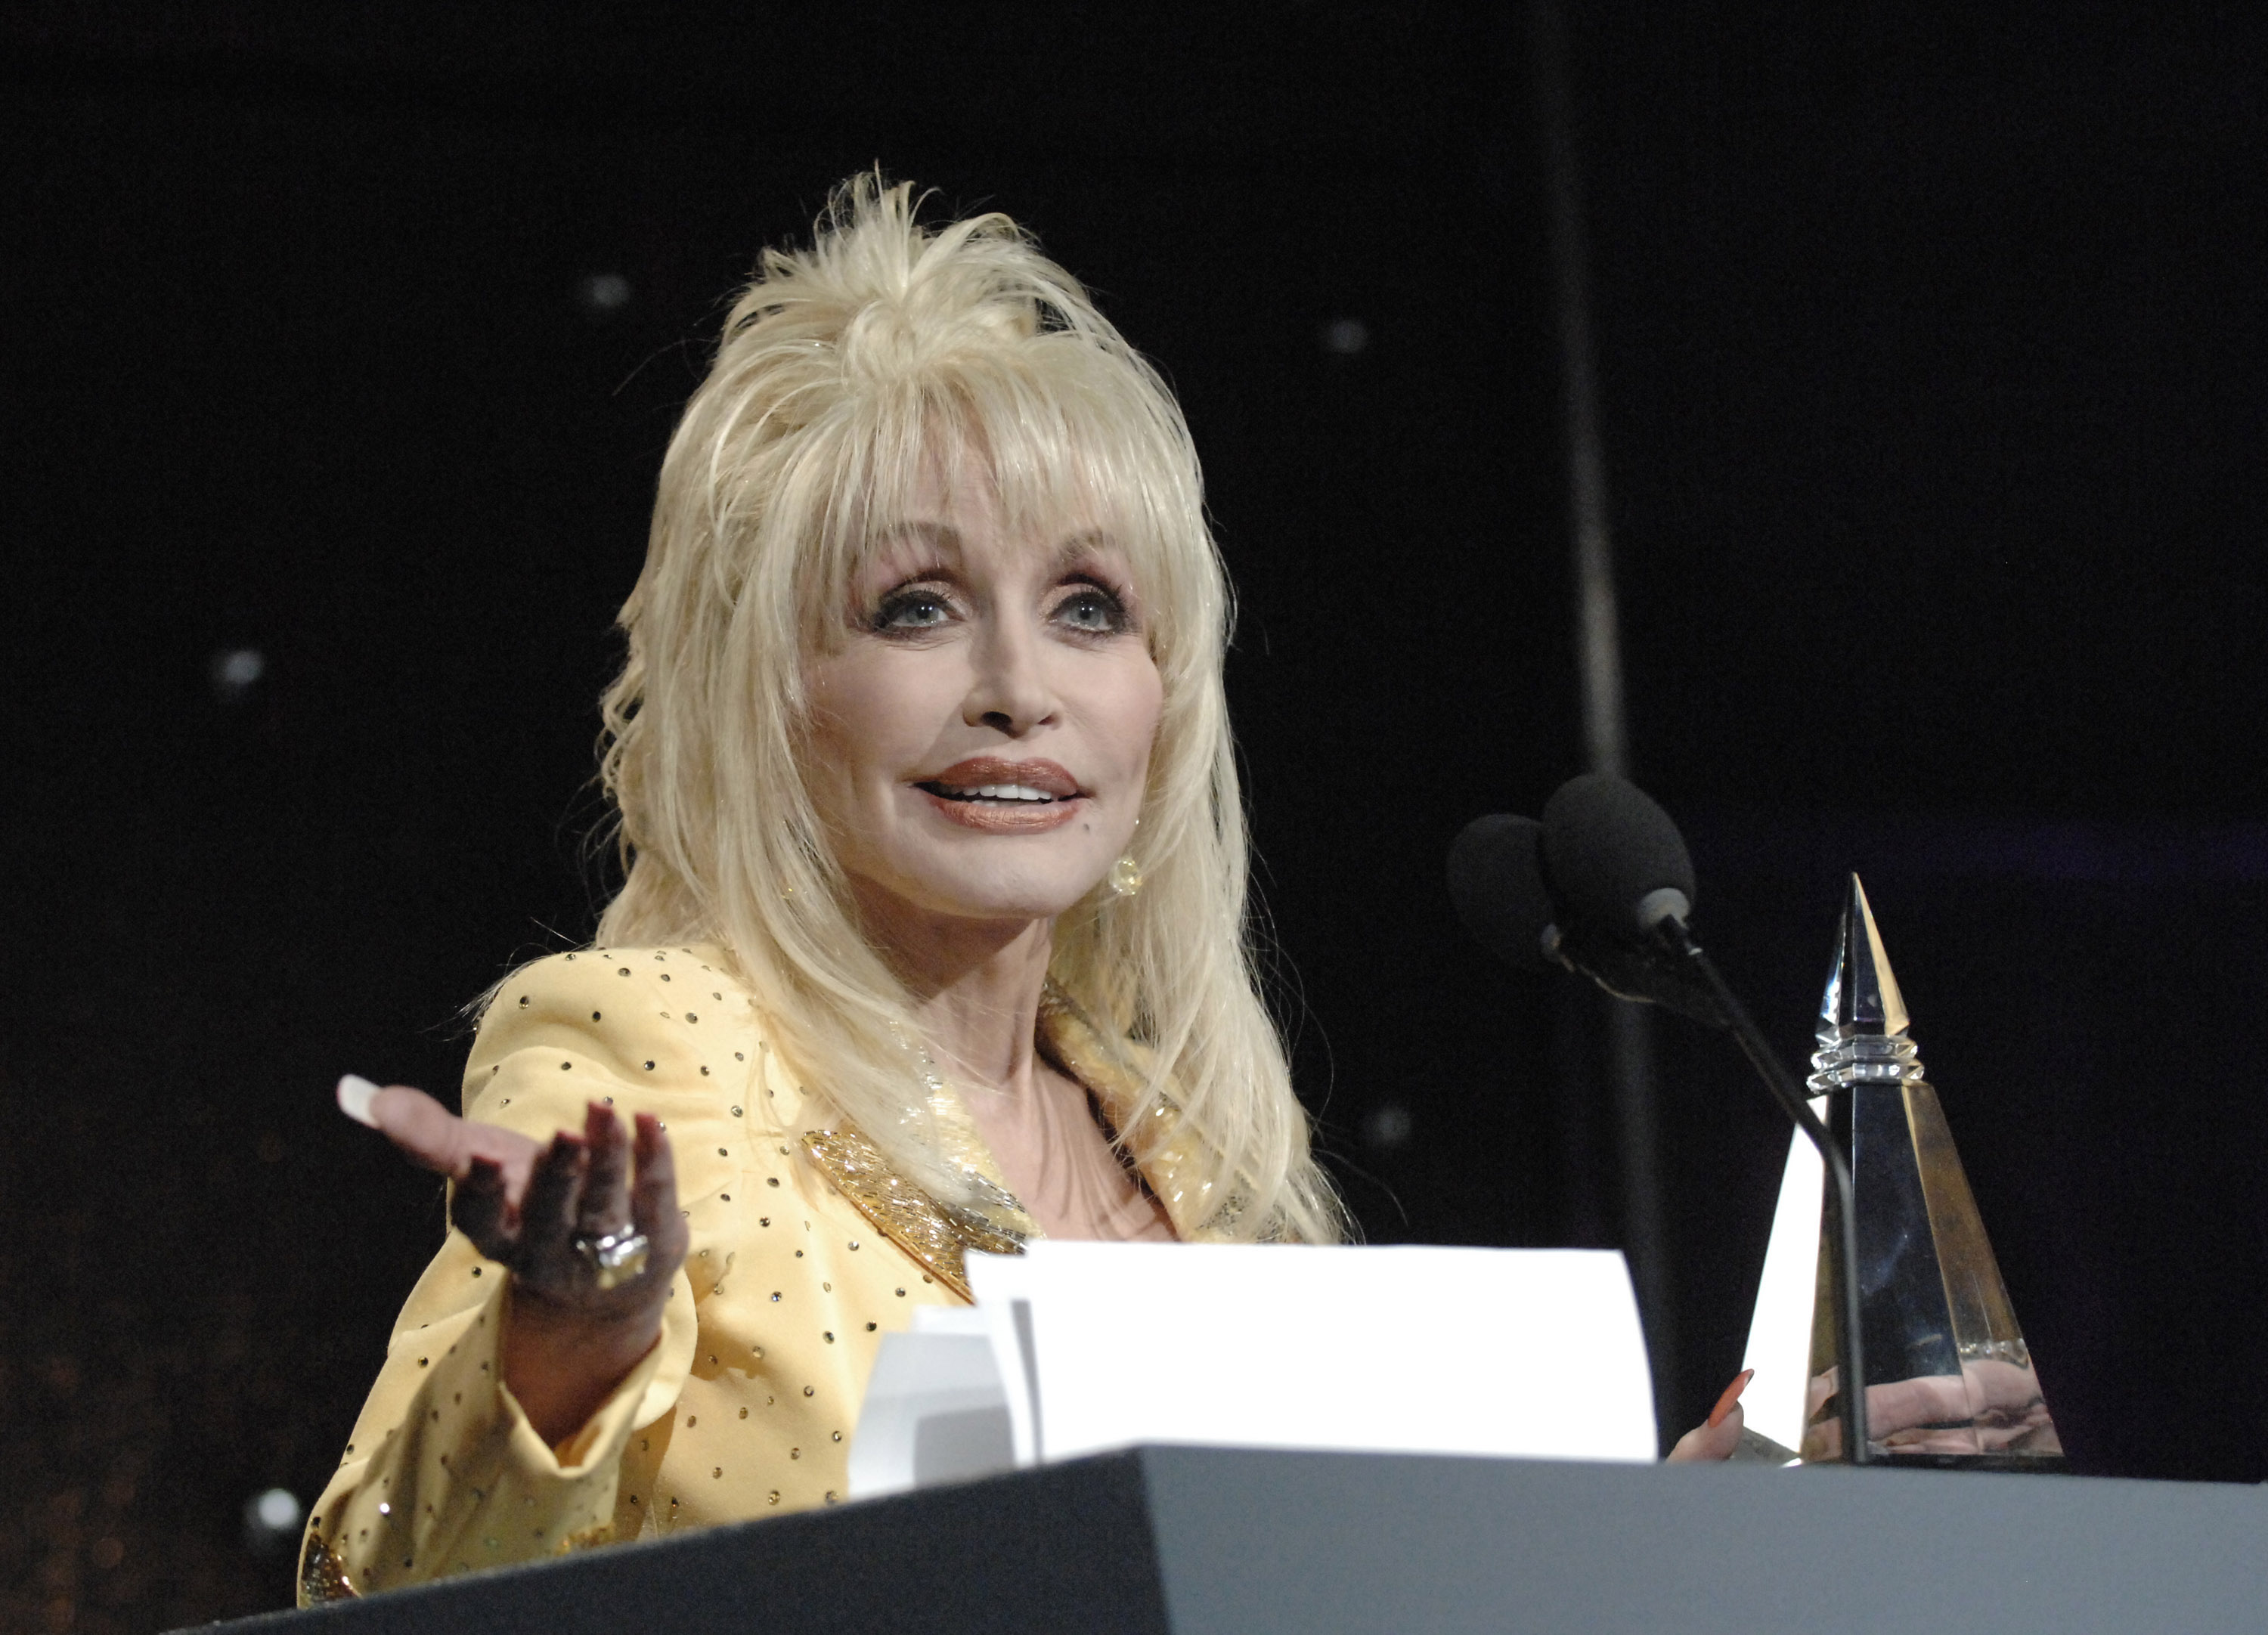 Dolly Parton during 38th Annual Songwriters Hall of Fame Ceremony - Show at Marriott Marquis in New York City